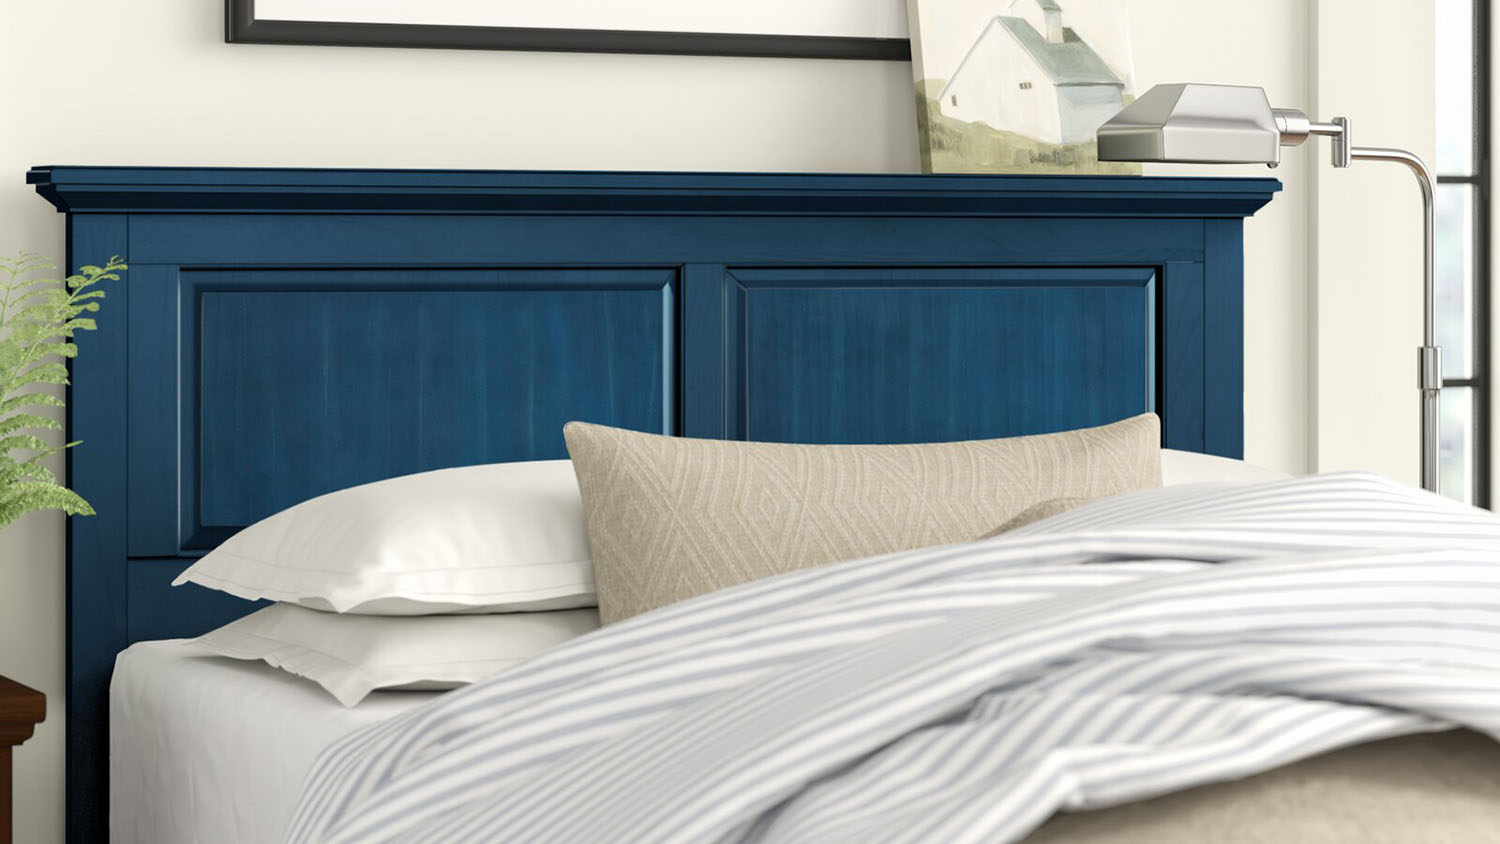 15 Best Headboards For Adjustable Beds, Can I Put A Headboard On An Adjustable Bed Frame